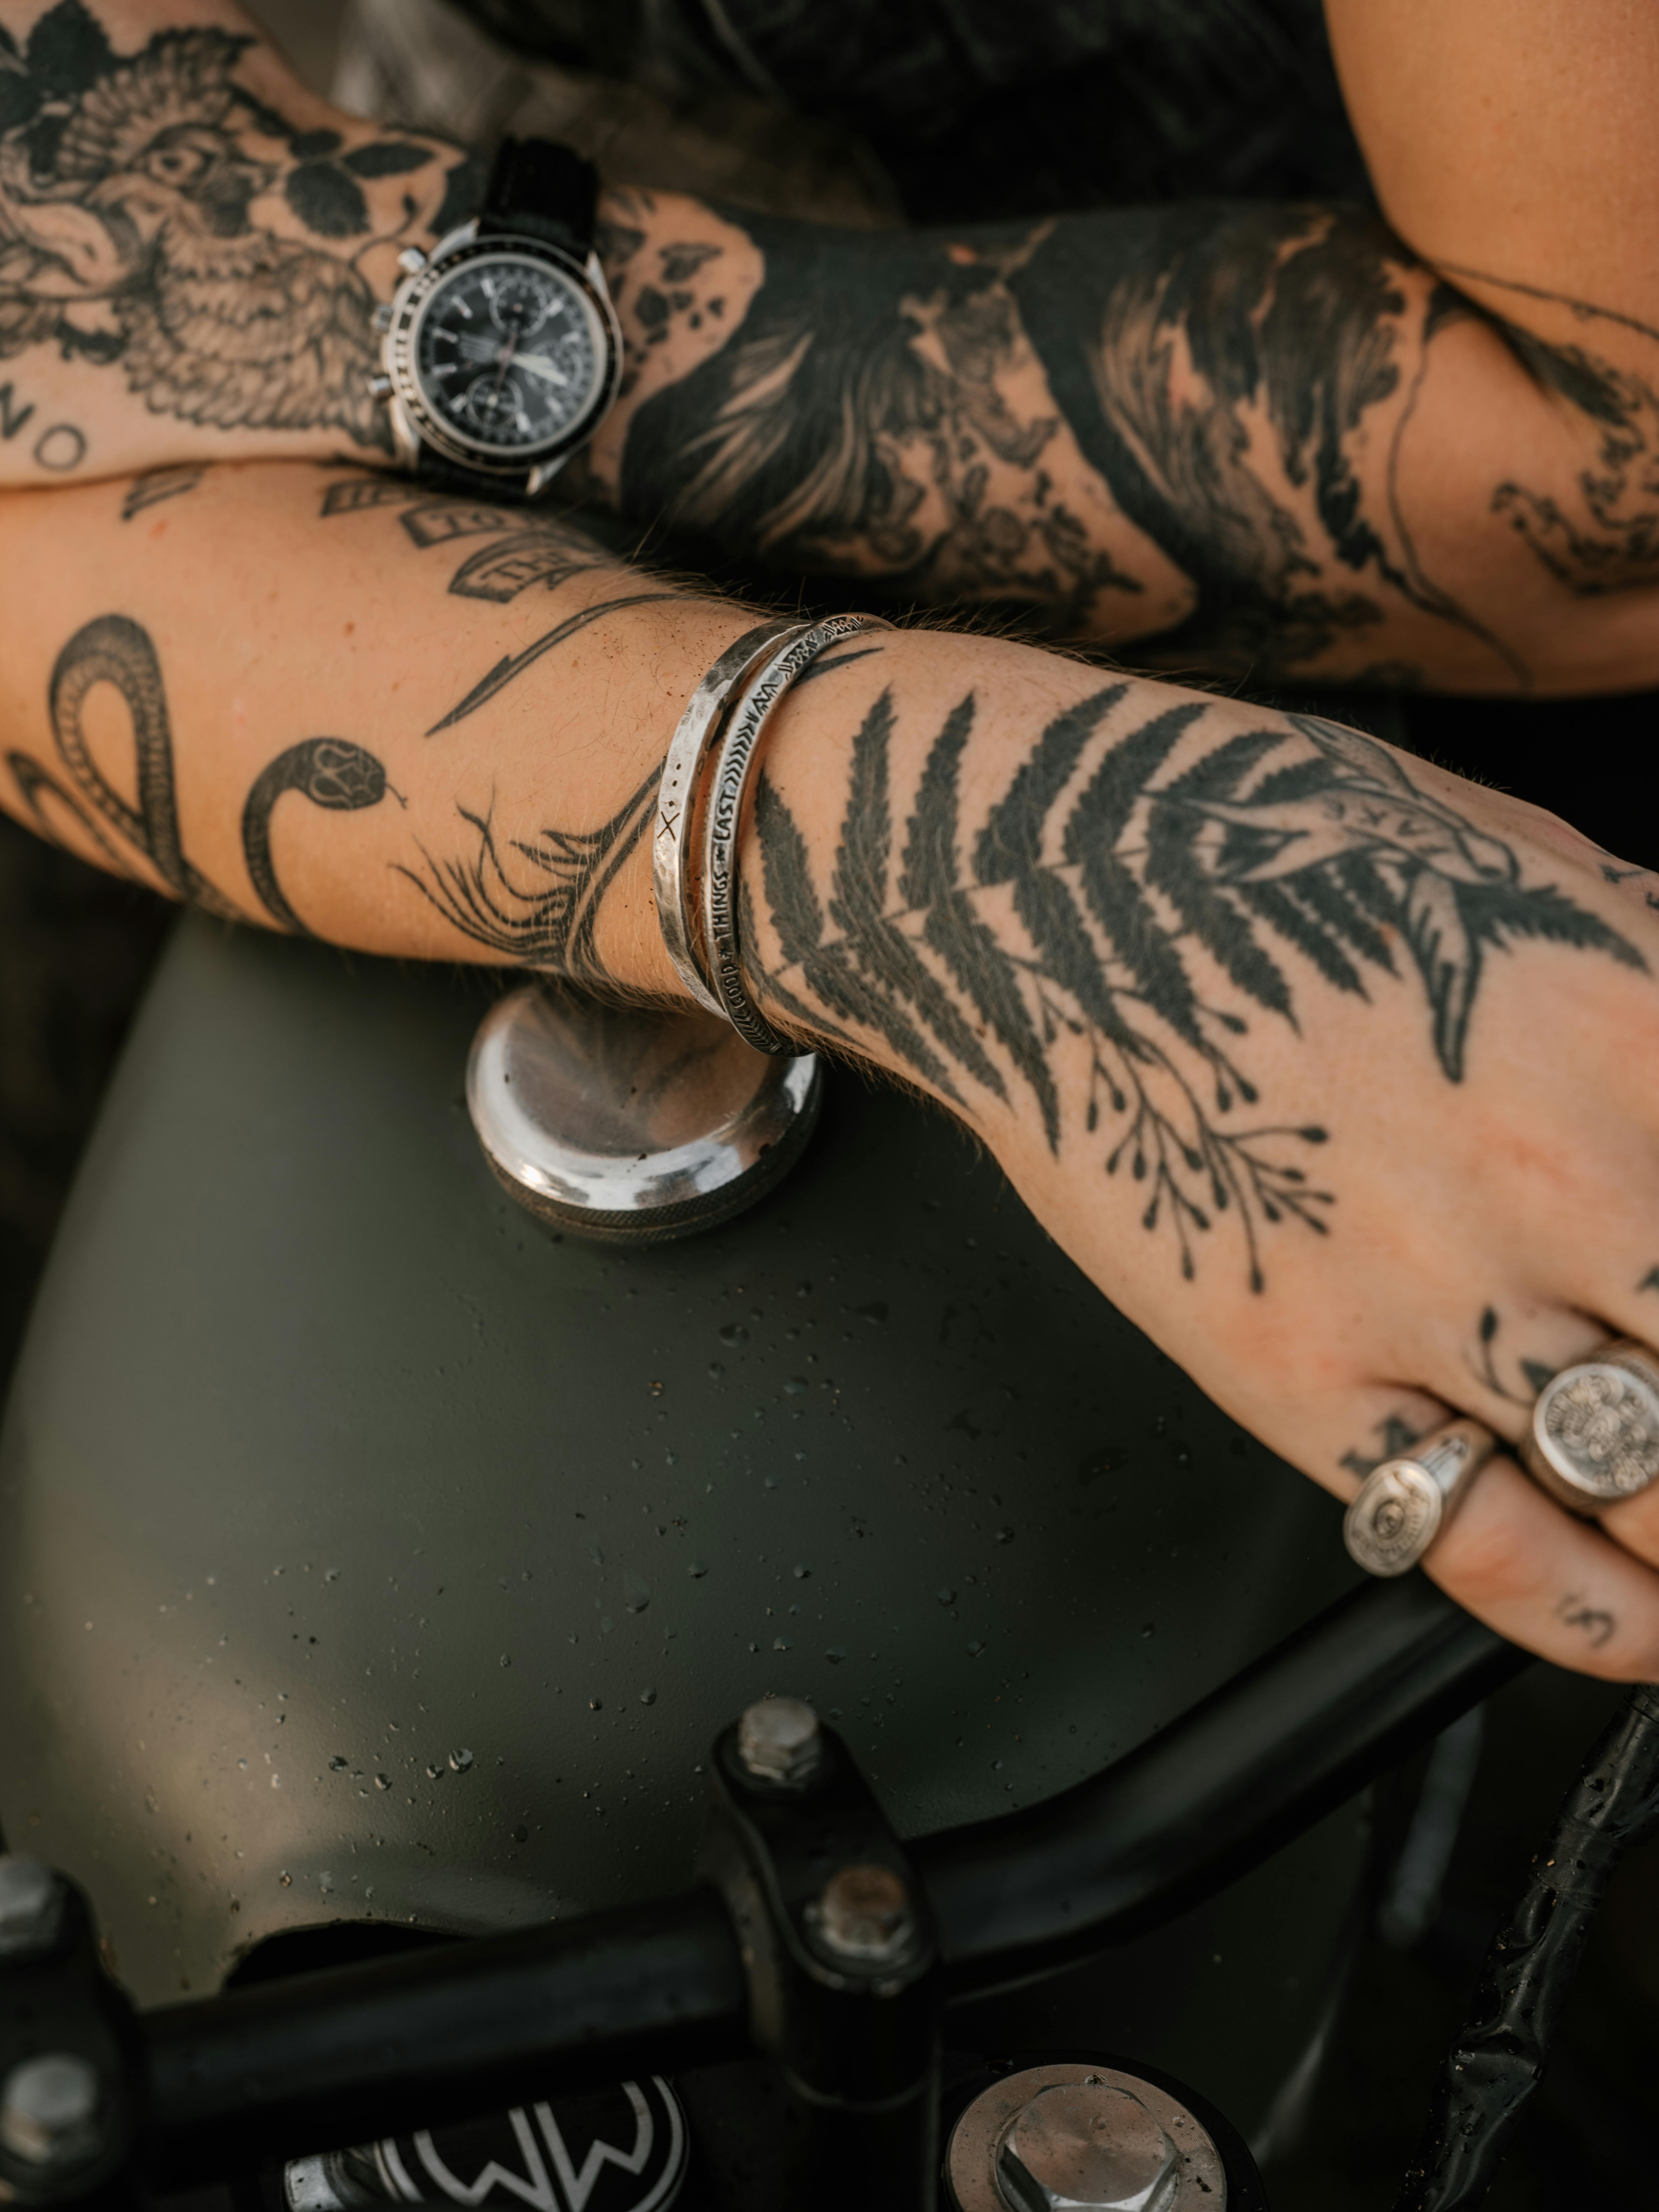 Crop man with tattoos and rings · Free Stock Photo